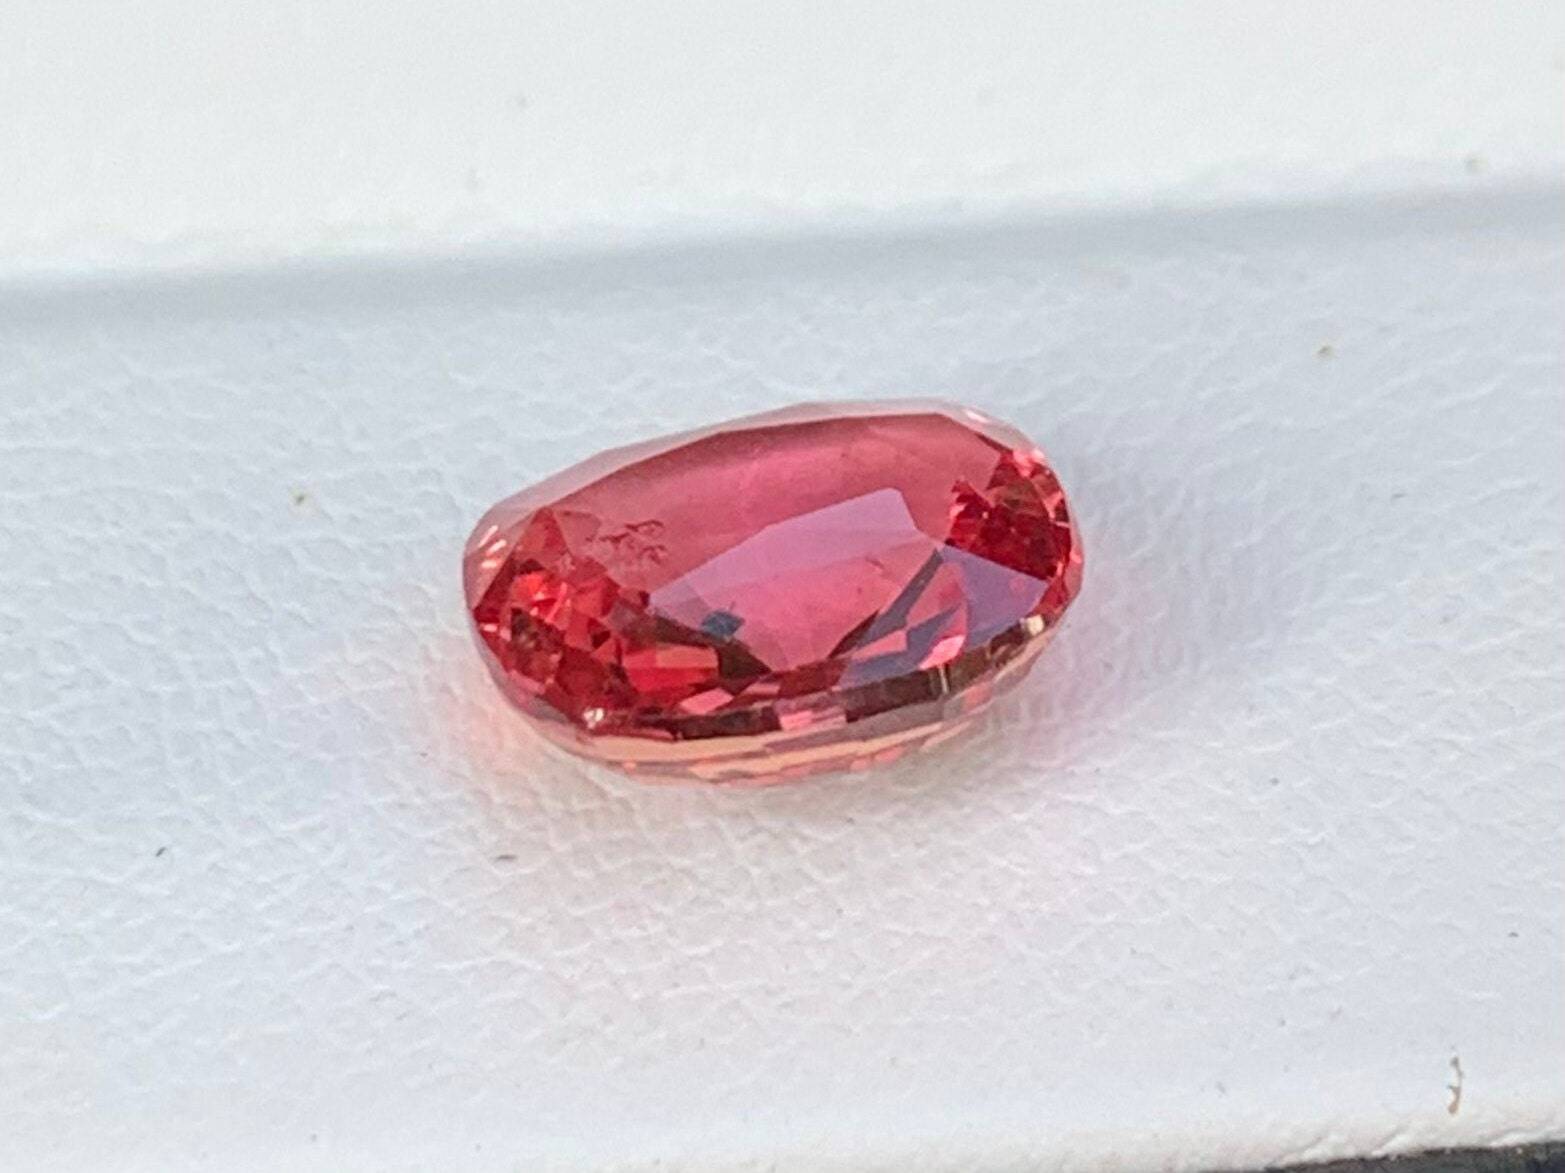 3.03 Cts Unheated Padparadscha Sapphire One-of-a-kind Rare Padparadscha - (UH) - Baza Boutique 